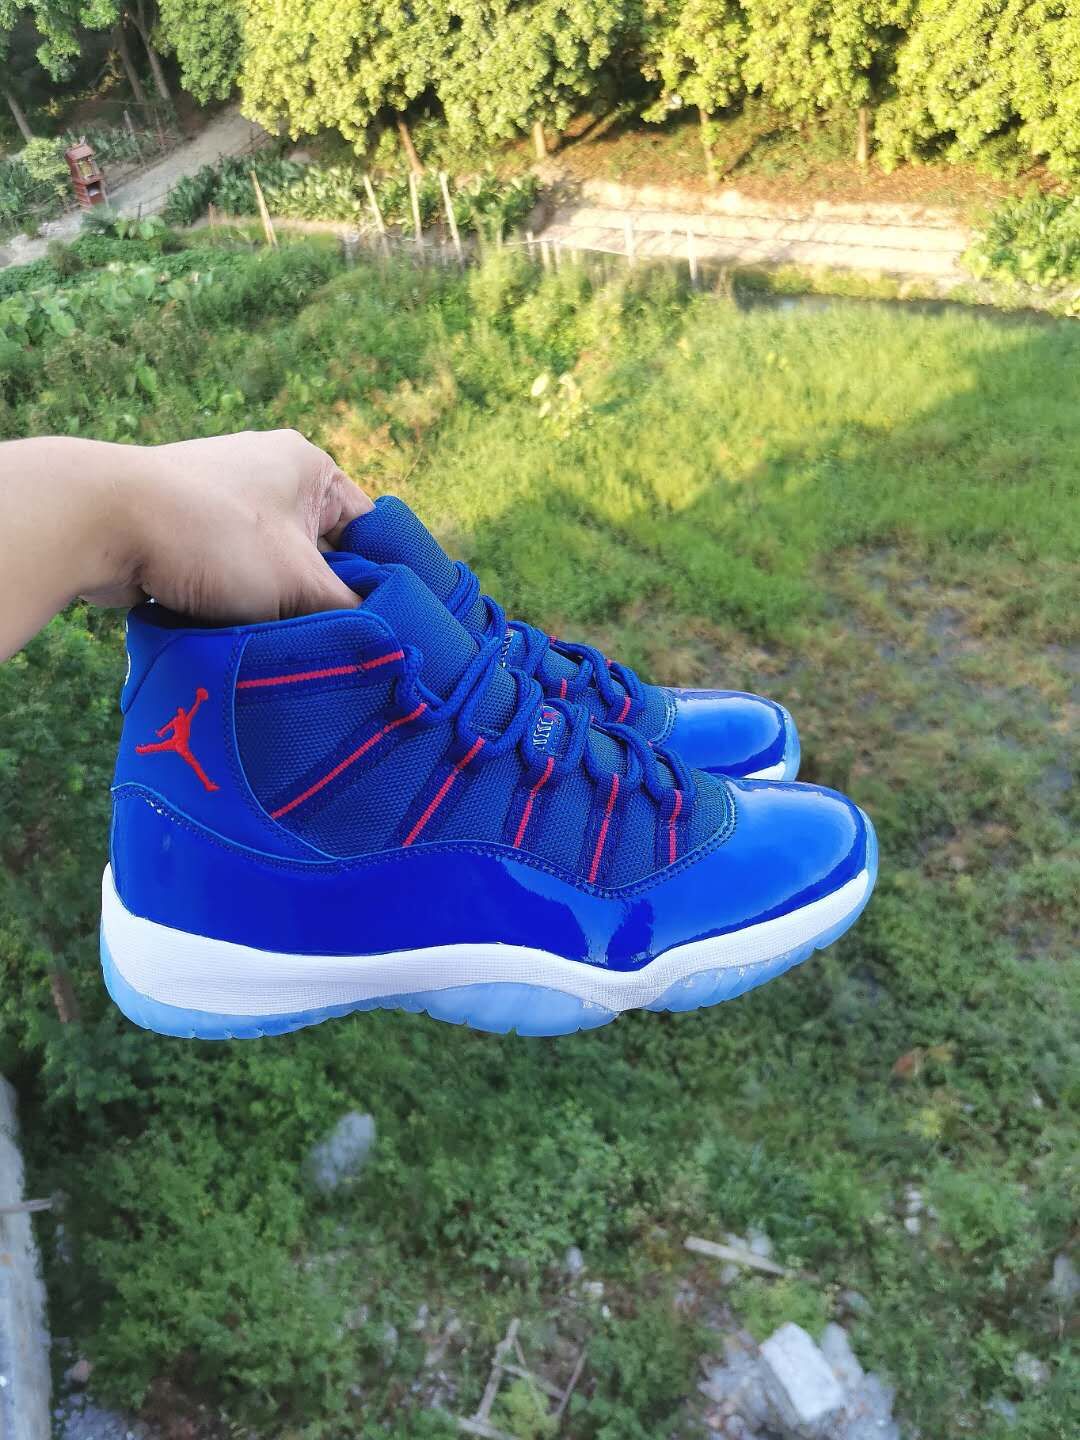 red white and blue jordans 11